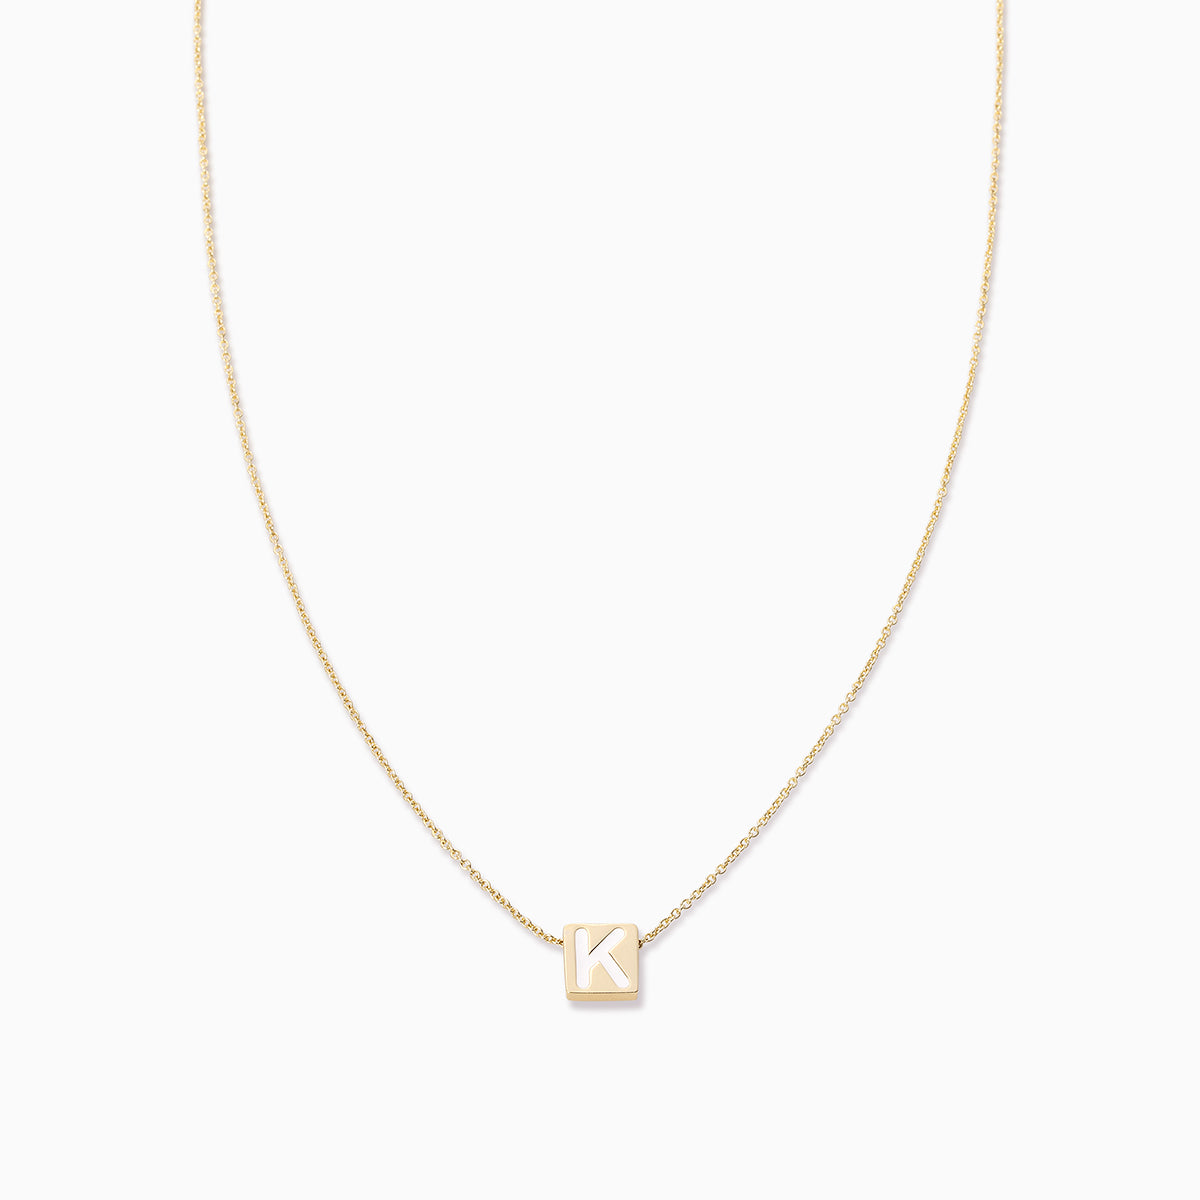 Bold Letter Necklace | Gold K | Product Image | Uncommon James